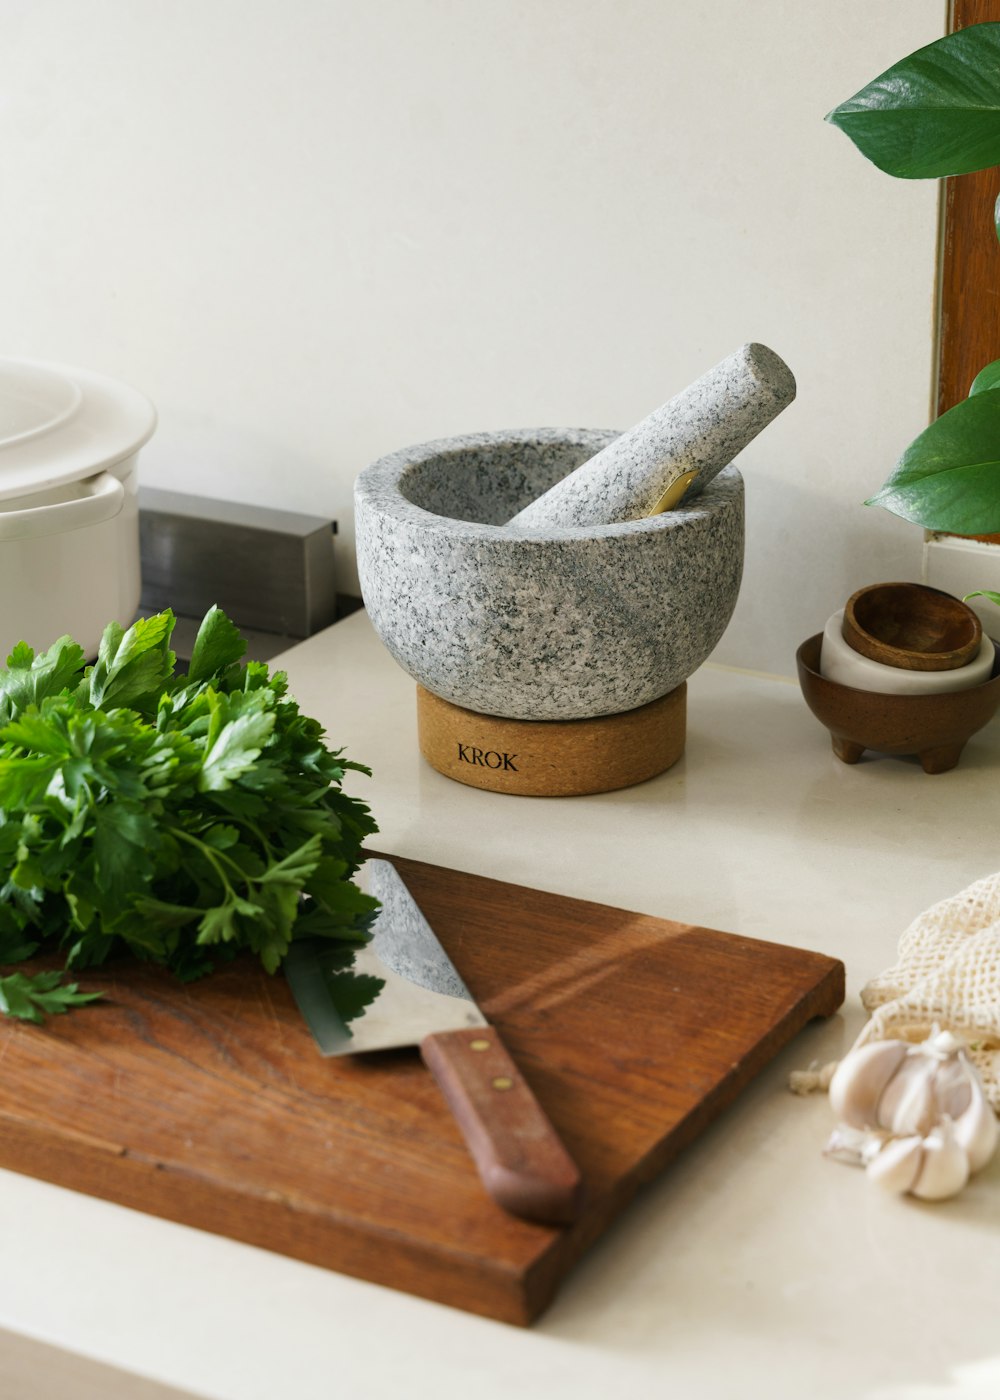 a cutting board with a knife and some parsley on it